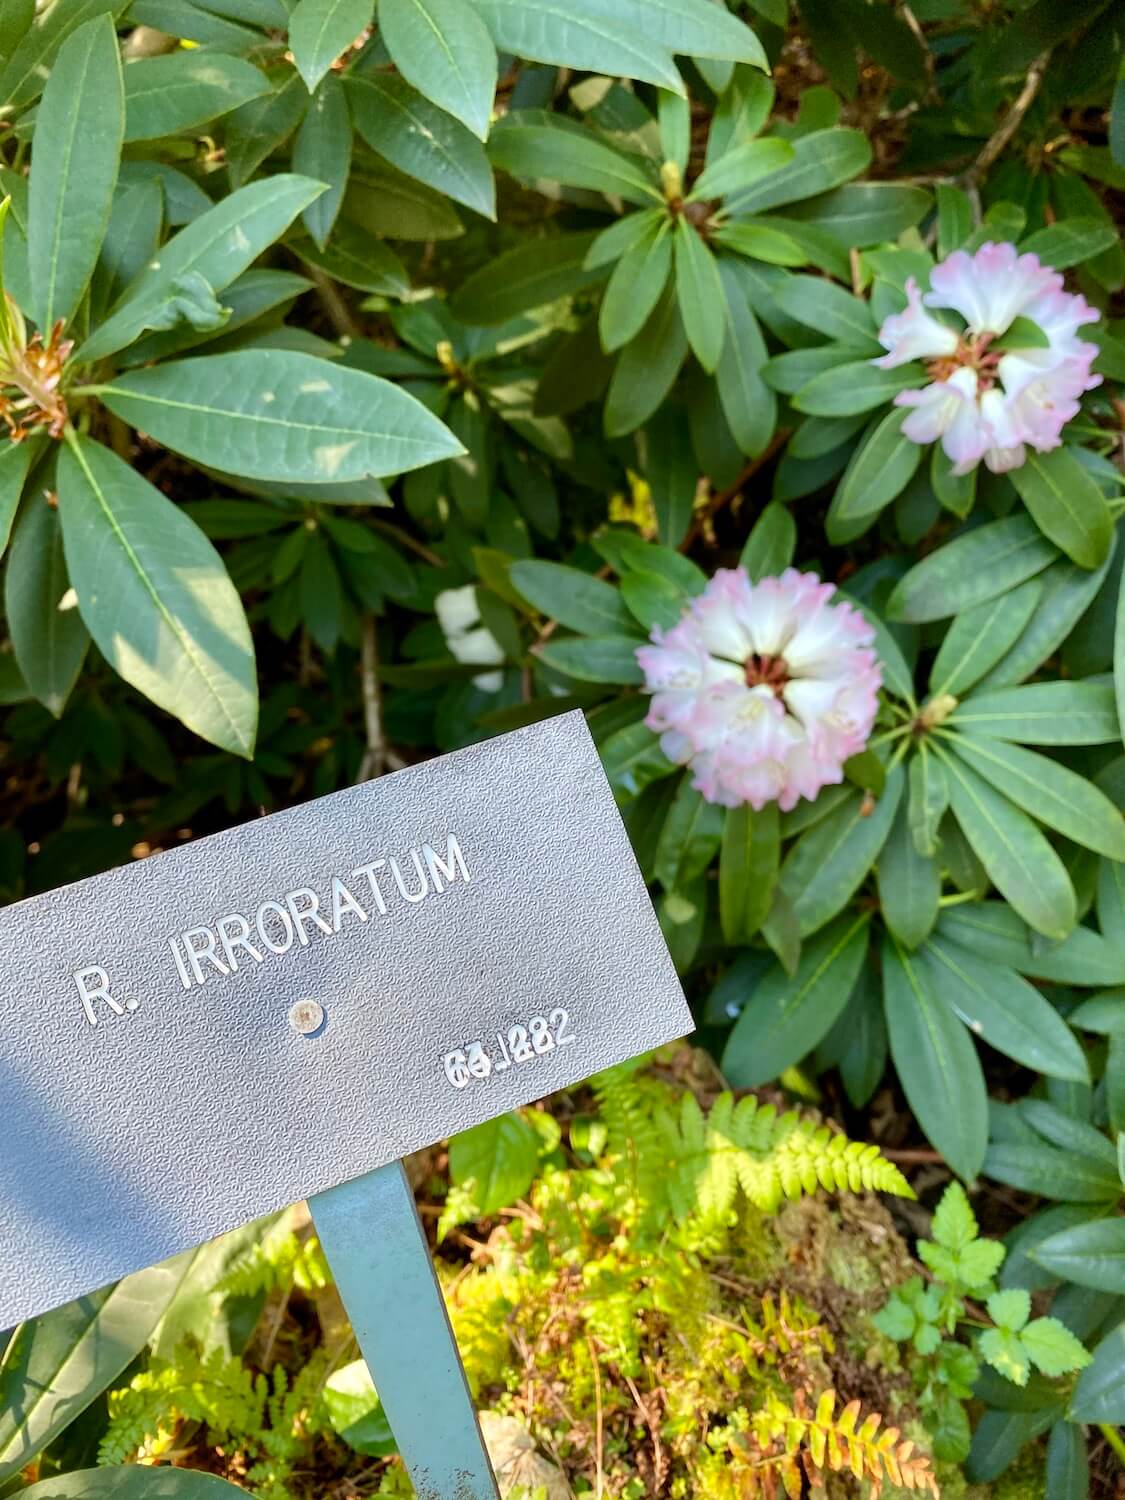 Two rhododendron blooms fan out amongst the waxy green leaves while a plastic plate with white engraved letters spells out the scientific name of the particular species. 